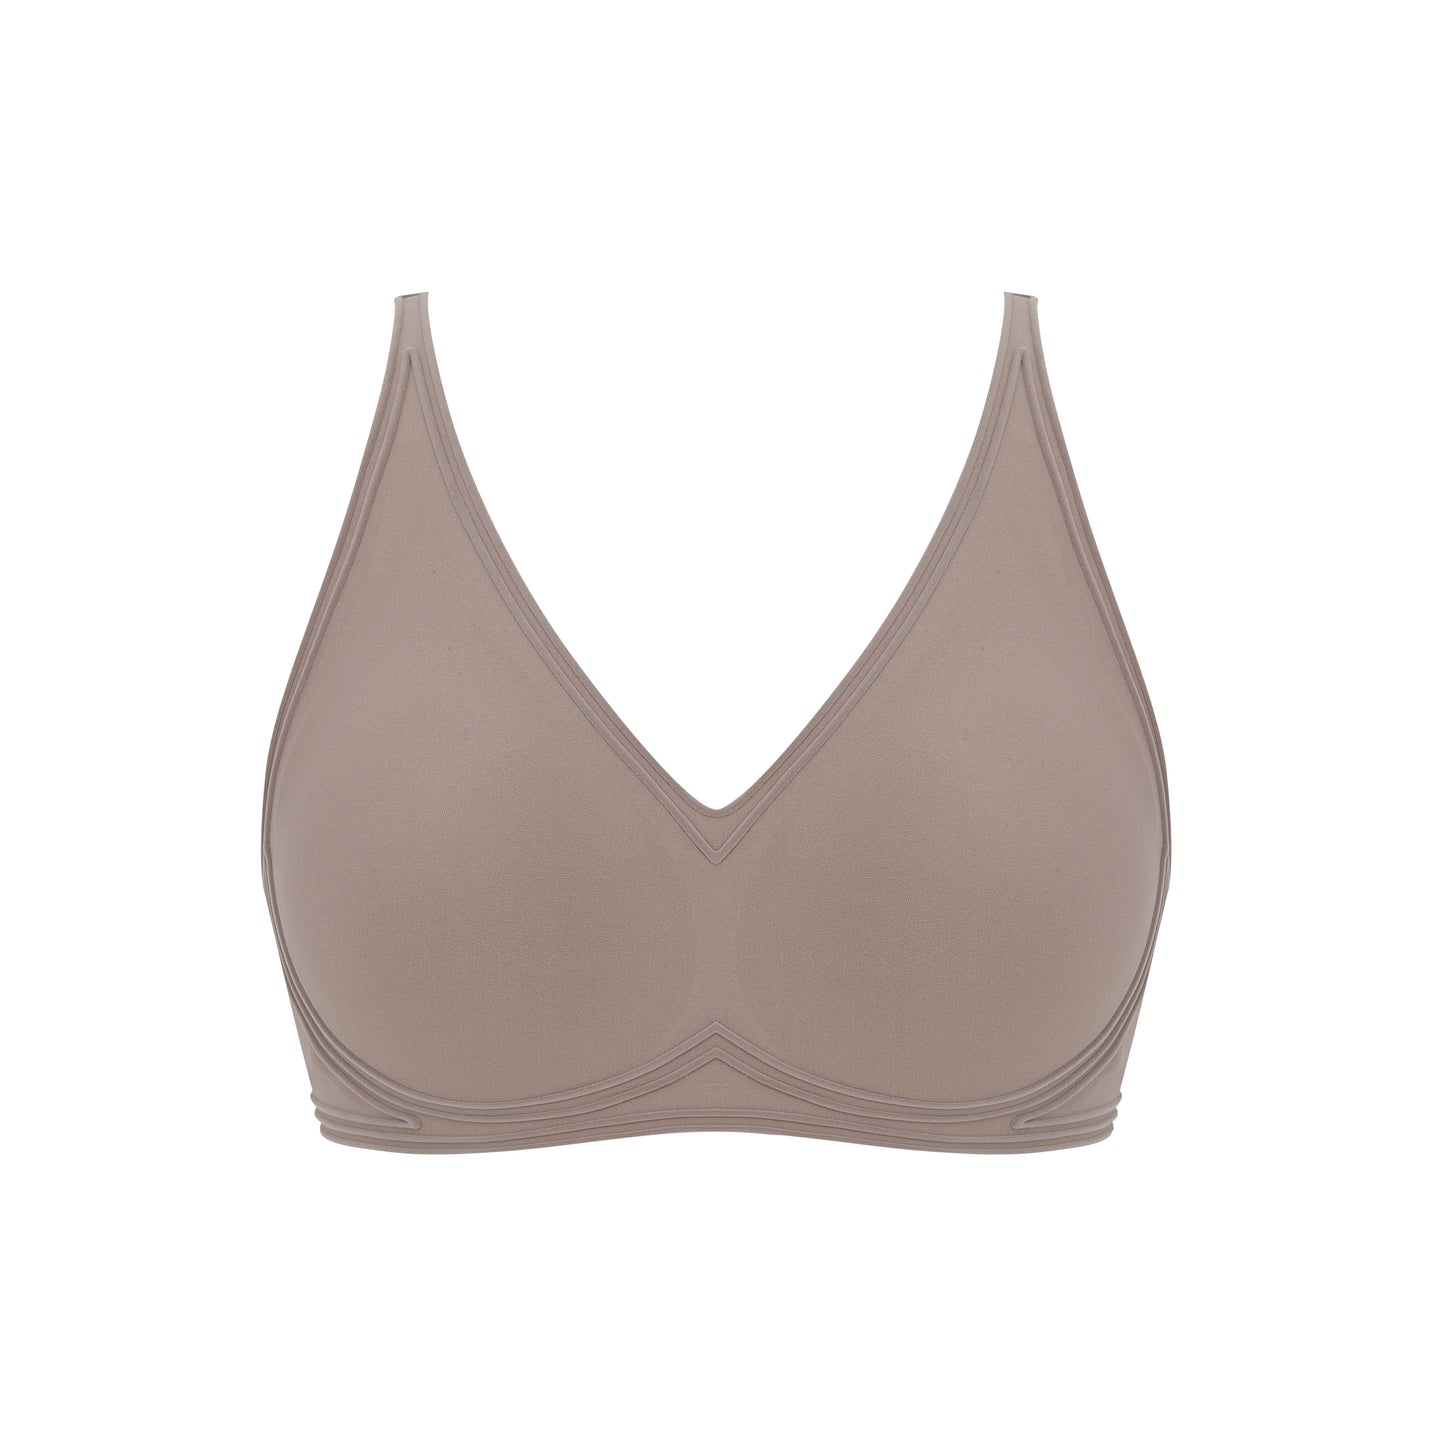 Endeer launches SHAPE, a sizeless bra designed with 3D technologies -  3Dnatives